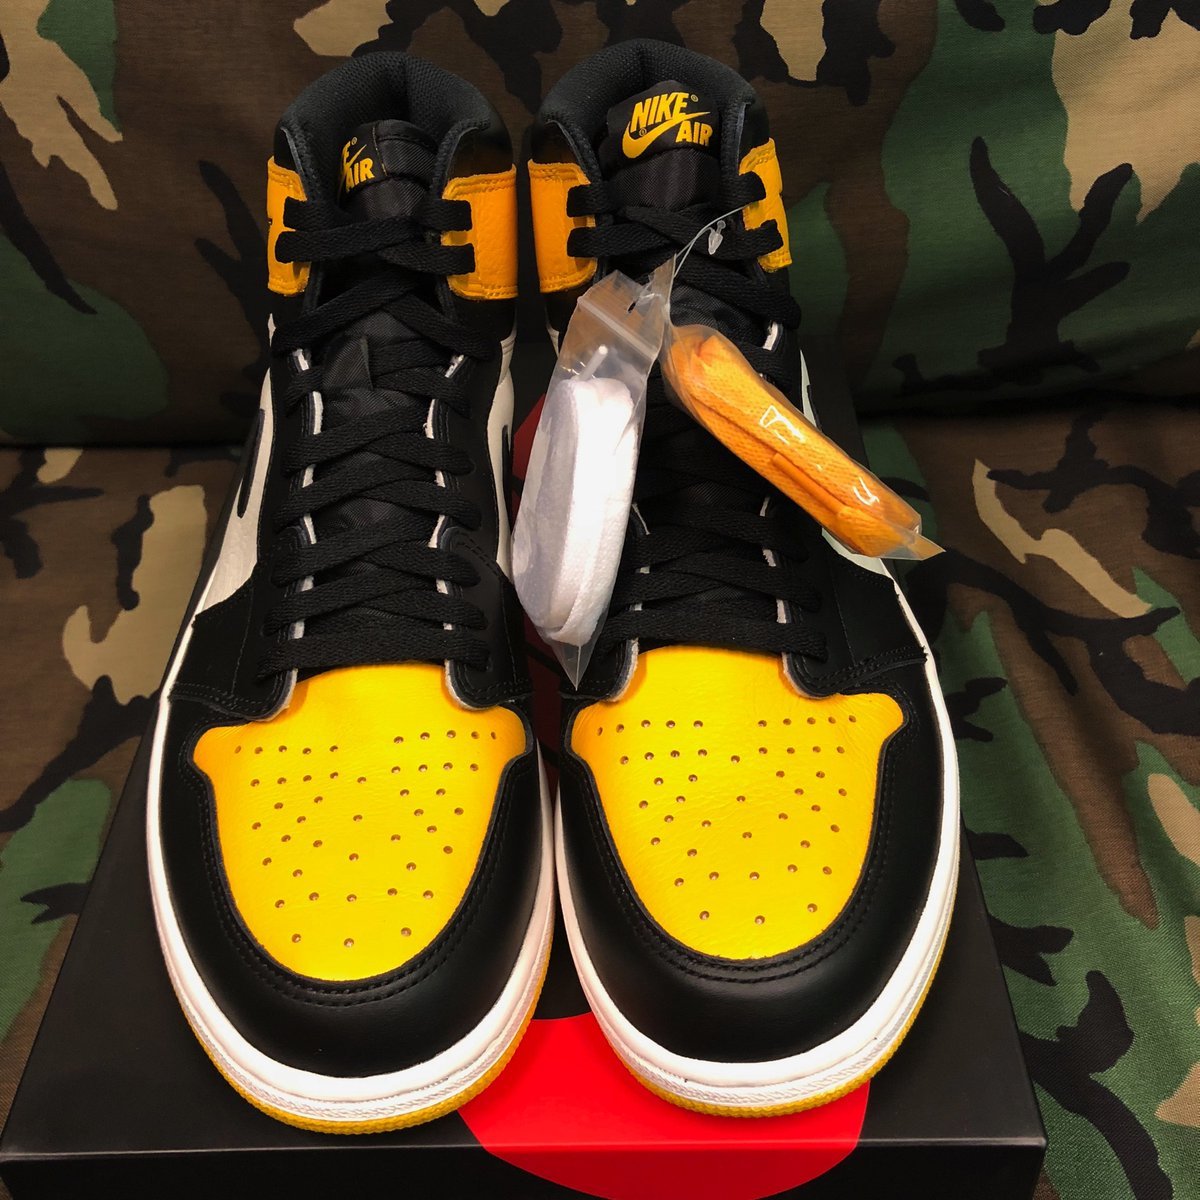 Shinedown Air Jordan 1 Attention Attention